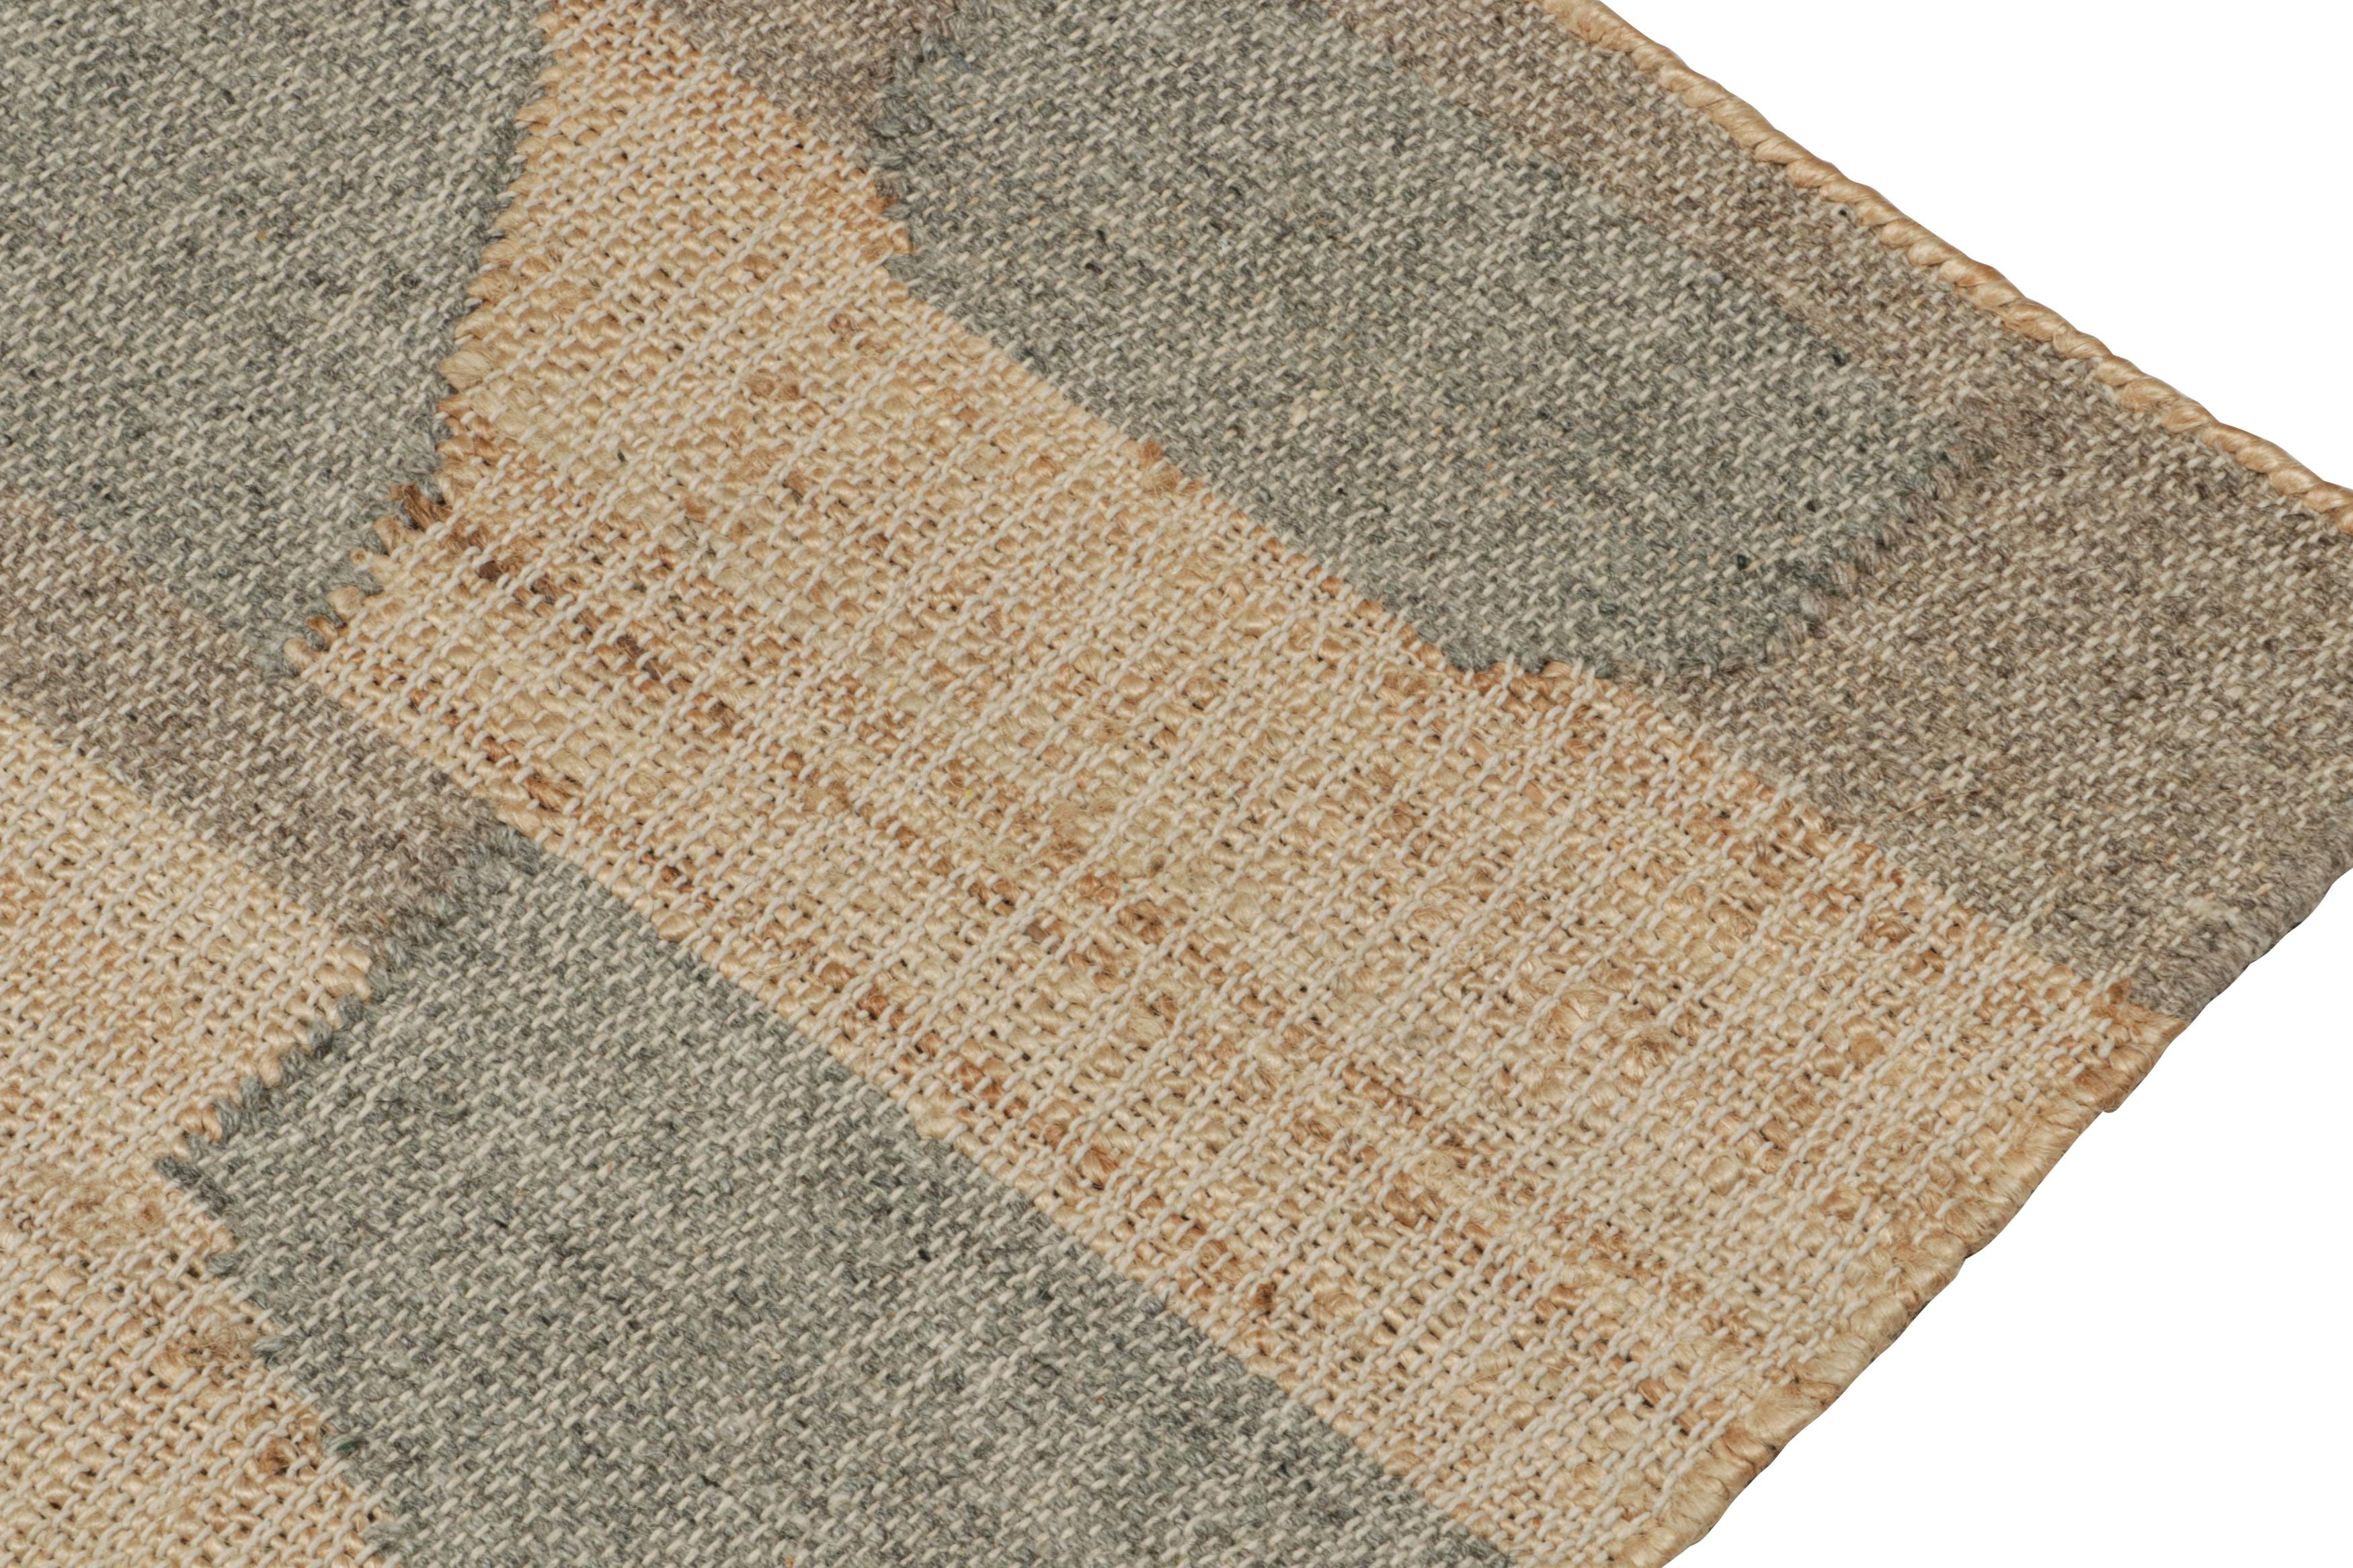 Rug & Kilim’s Modern Kilim rug in Beige-Brown & Grey Patterns In New Condition For Sale In Long Island City, NY